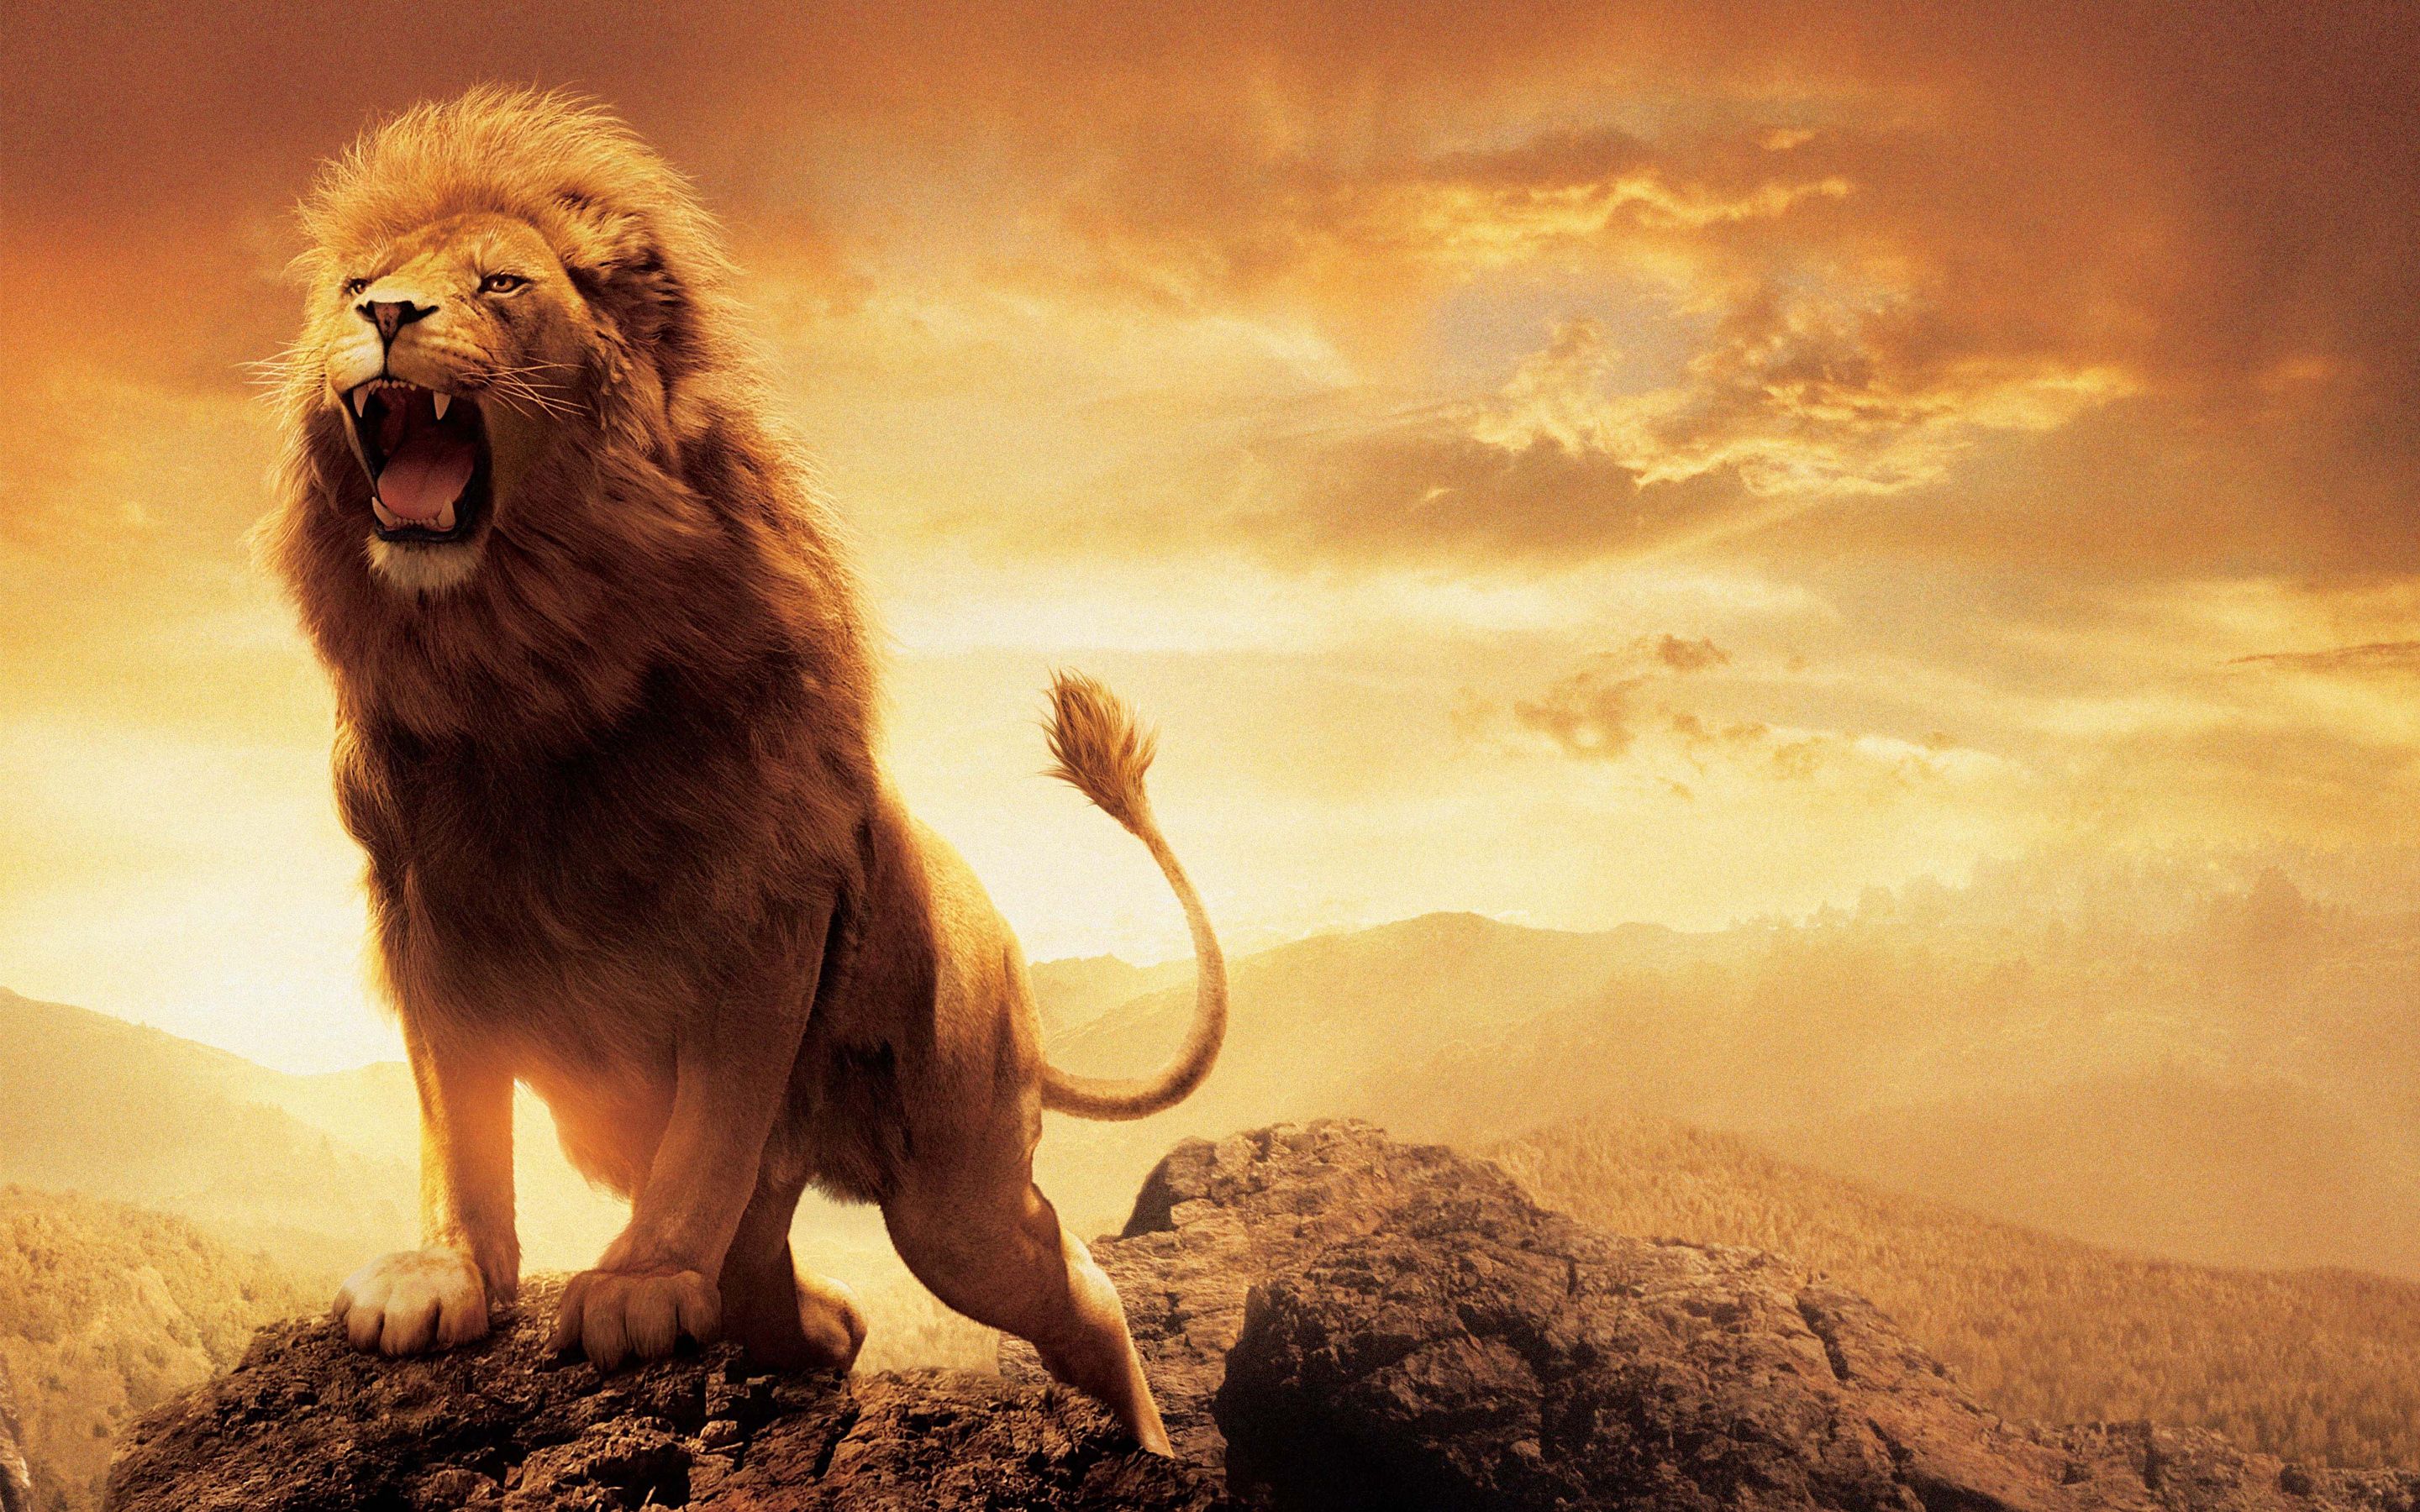 HD wallpaper: Movie, The Chronicles of Narnia: The Lion, the Witch